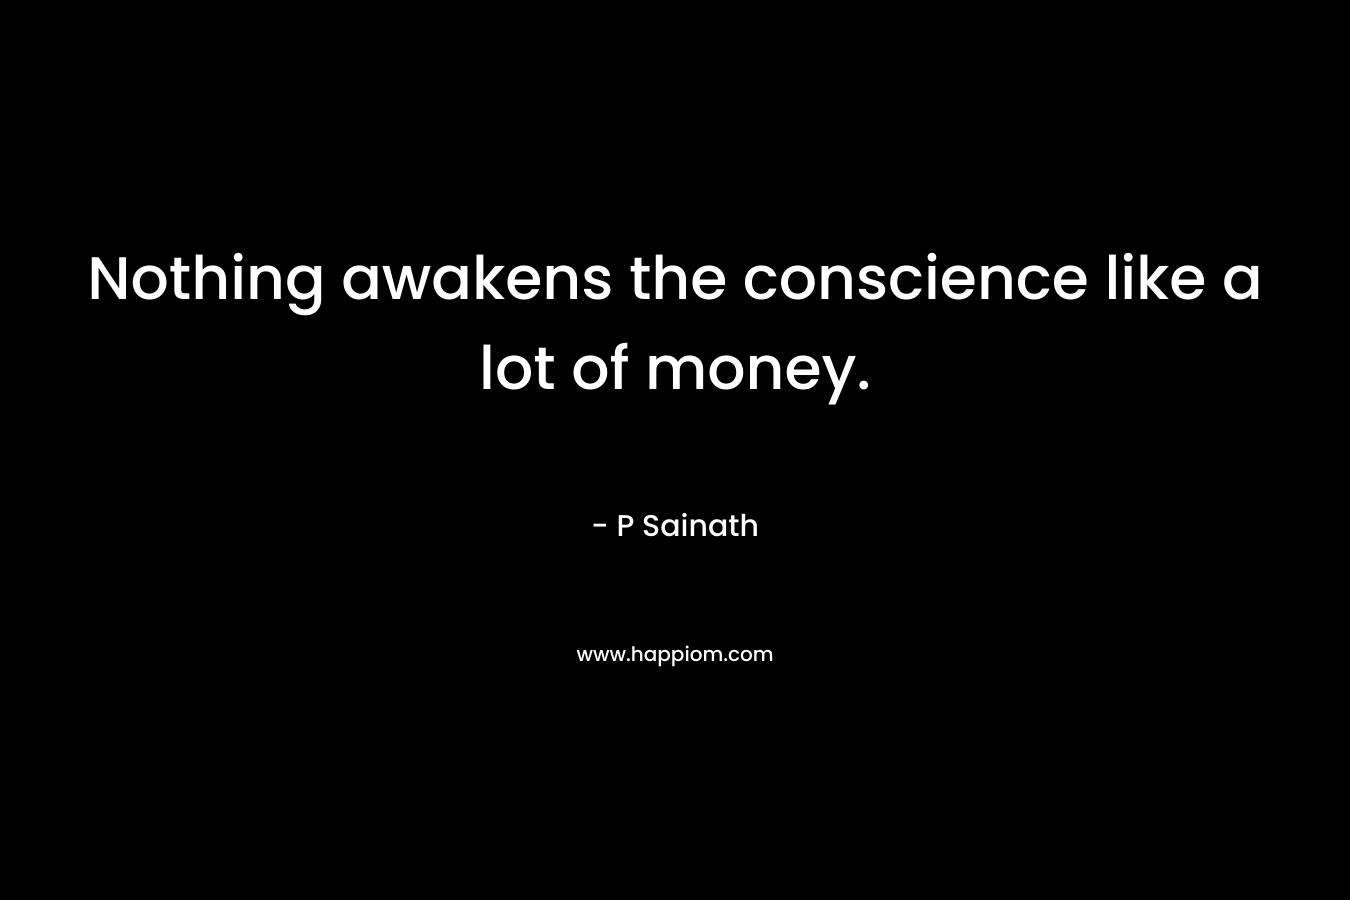 Nothing awakens the conscience like a lot of money.